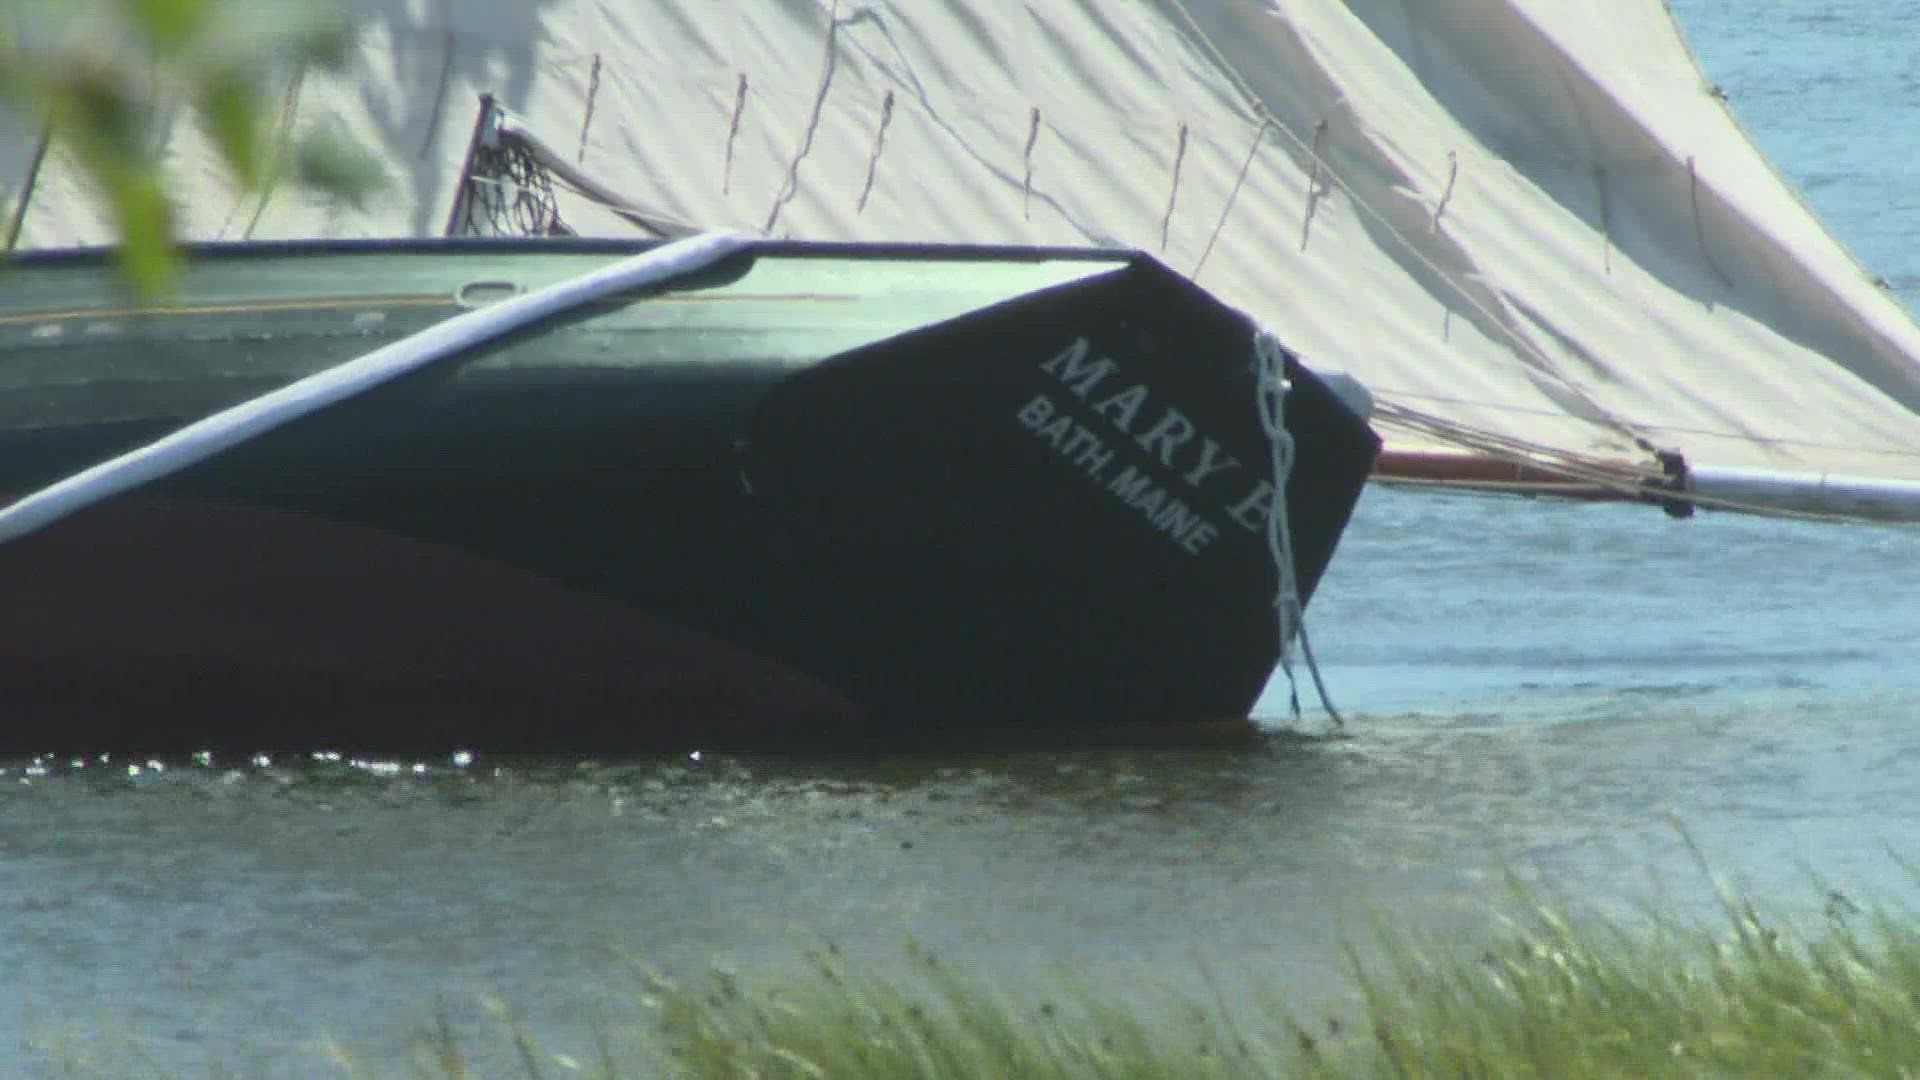 The boat was towed to the river bank last night, where it still remains.